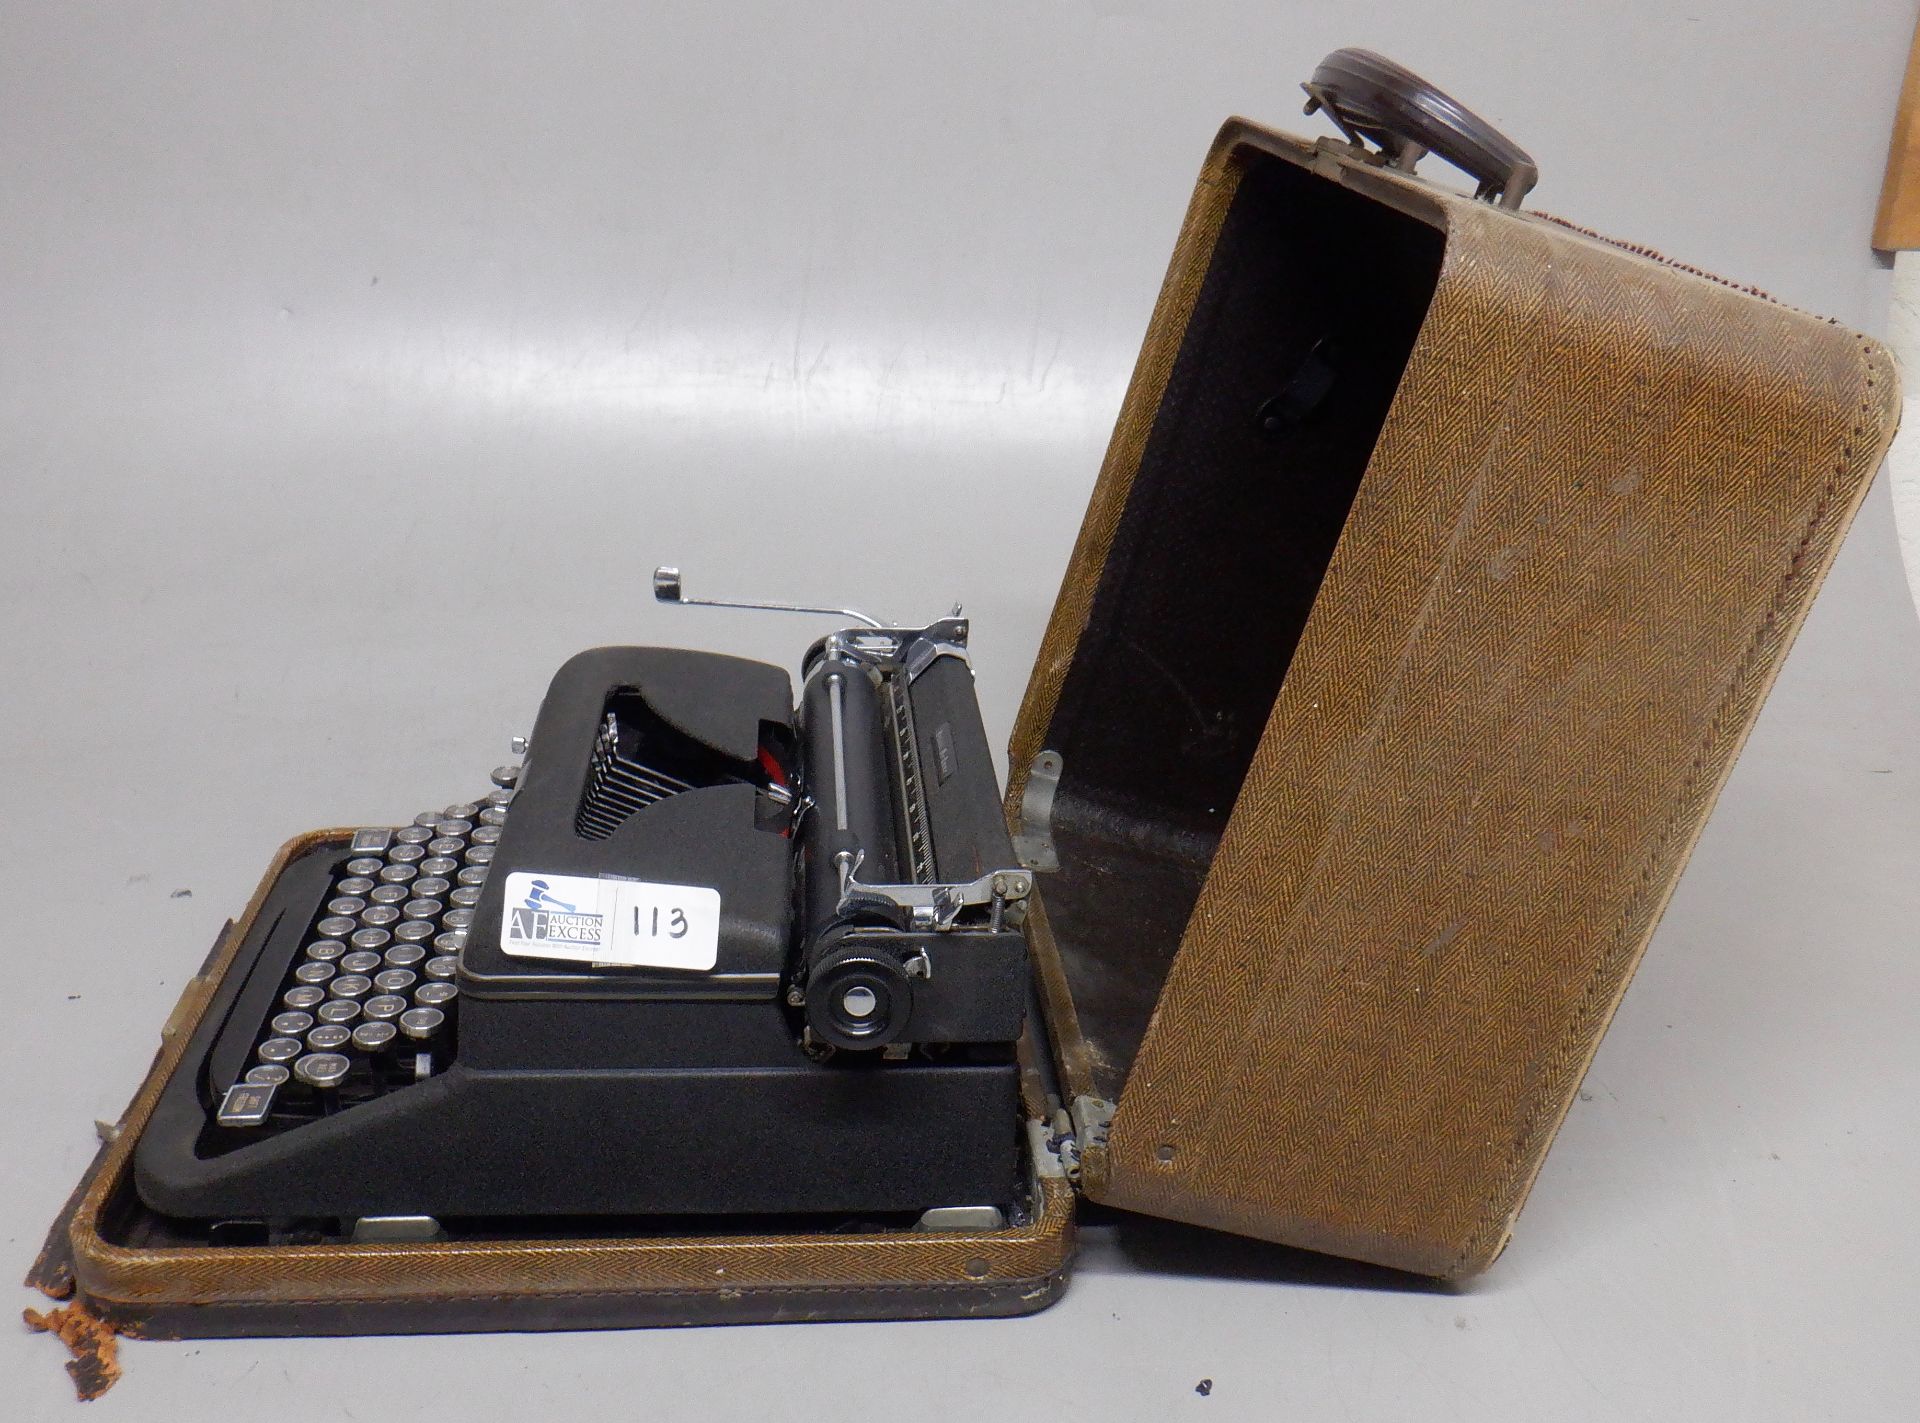 ANTIQUE ROYAL QUIET DELUXE TYPEWRITER IN CASE - Image 3 of 3